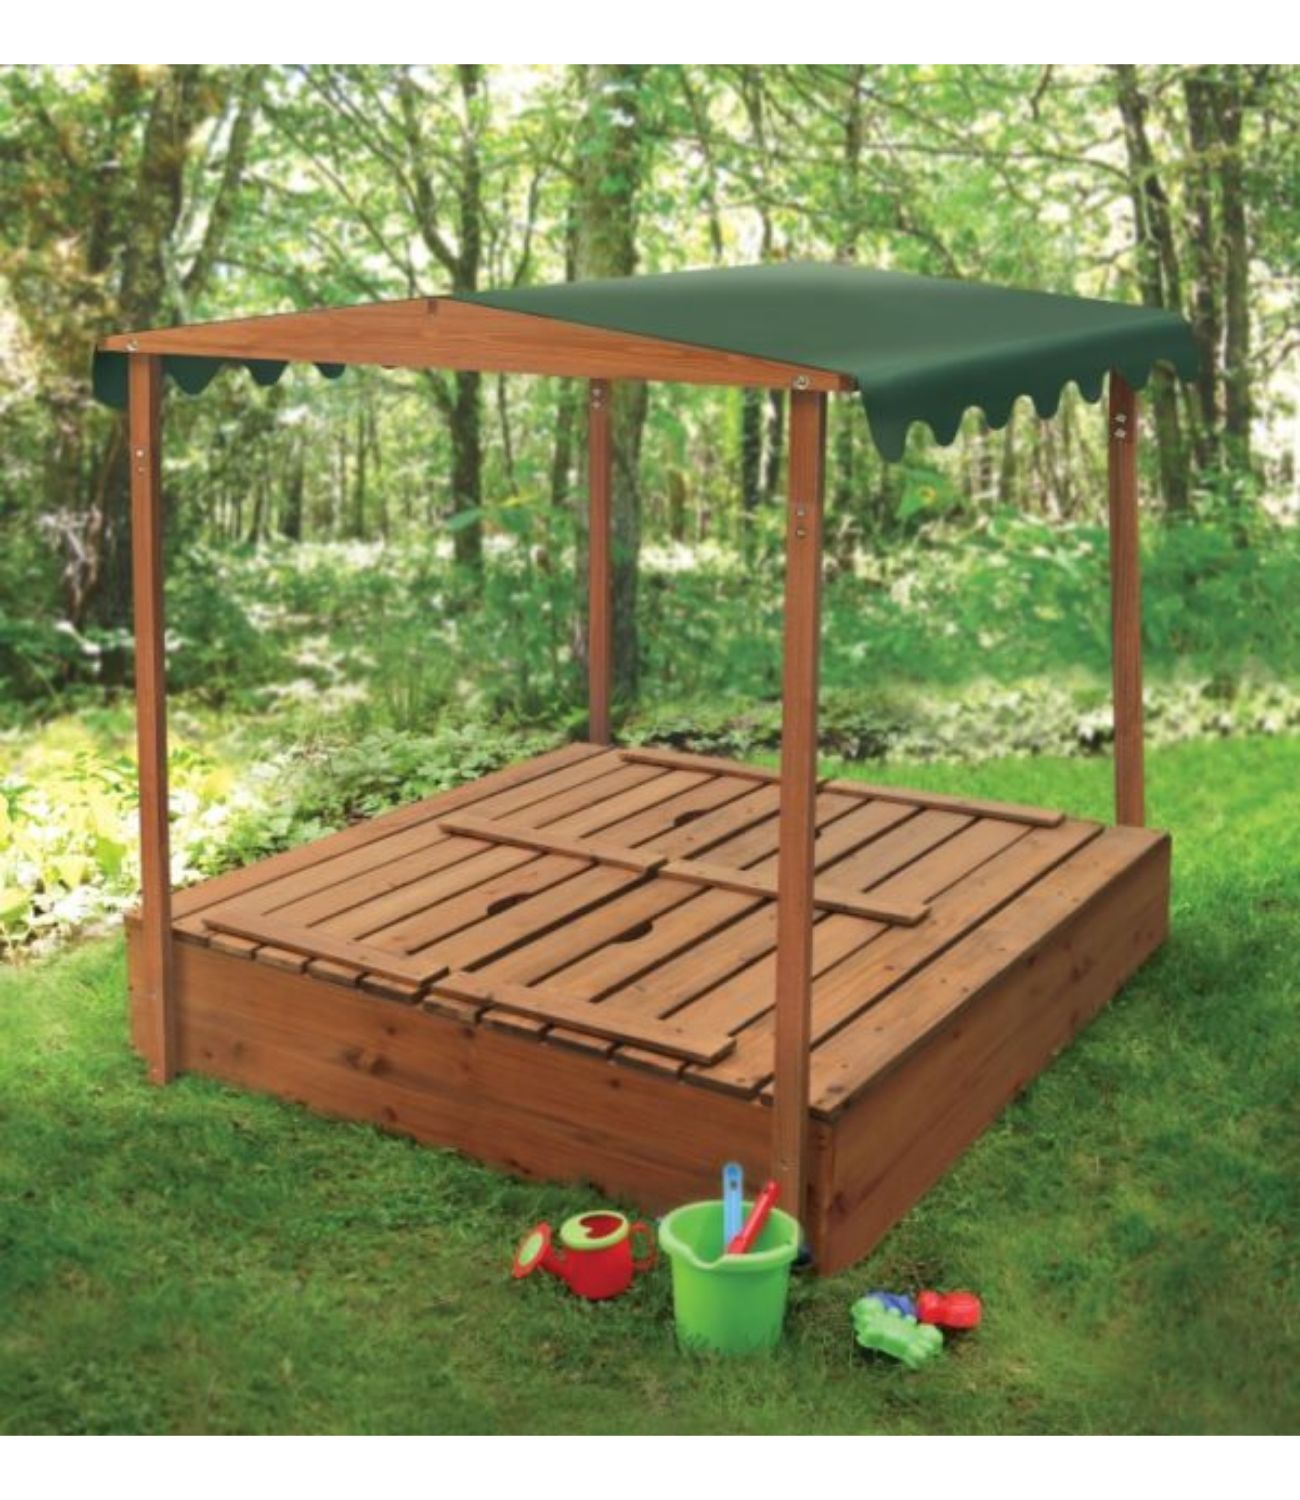 Buy Badger Basket Convertible Sandbox with Canopy & Benches Online